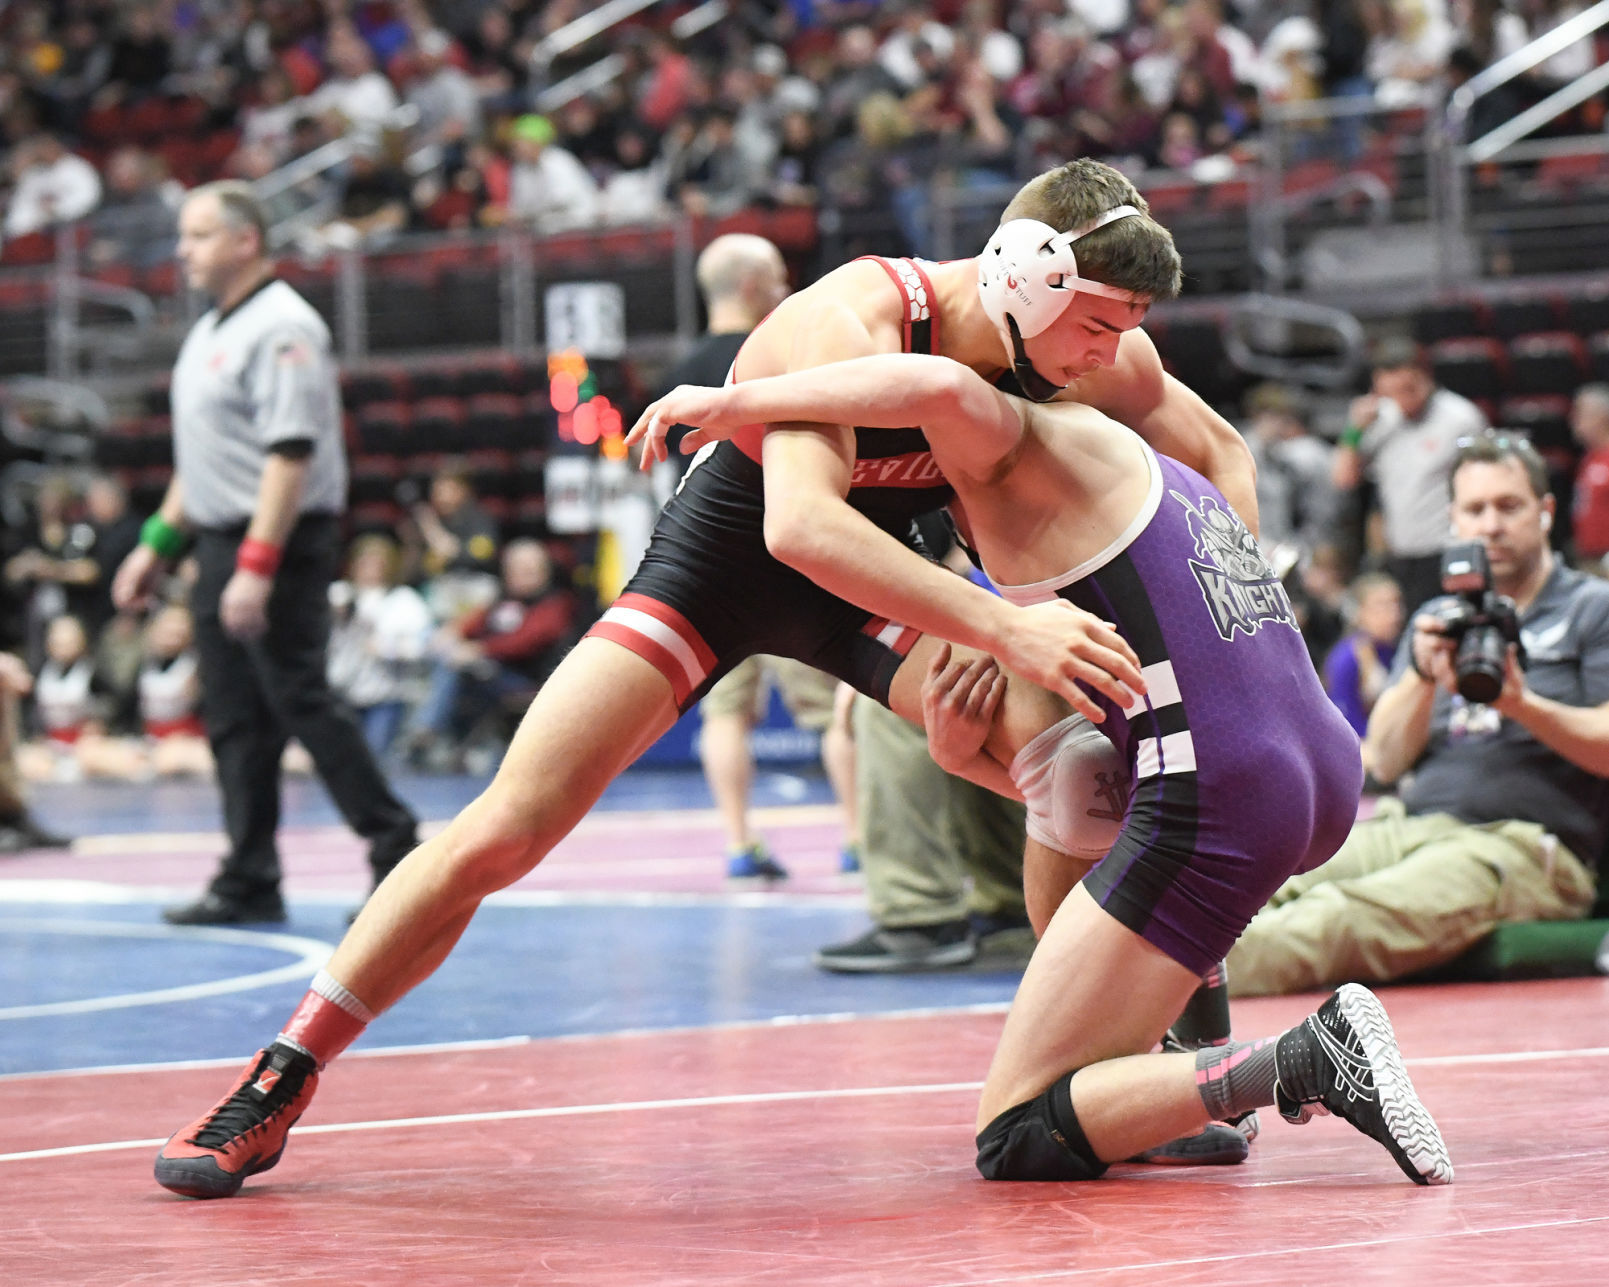 Small school, big dreams Ricevilles trio of ranked wrestlers have sights set on Des Moines picture